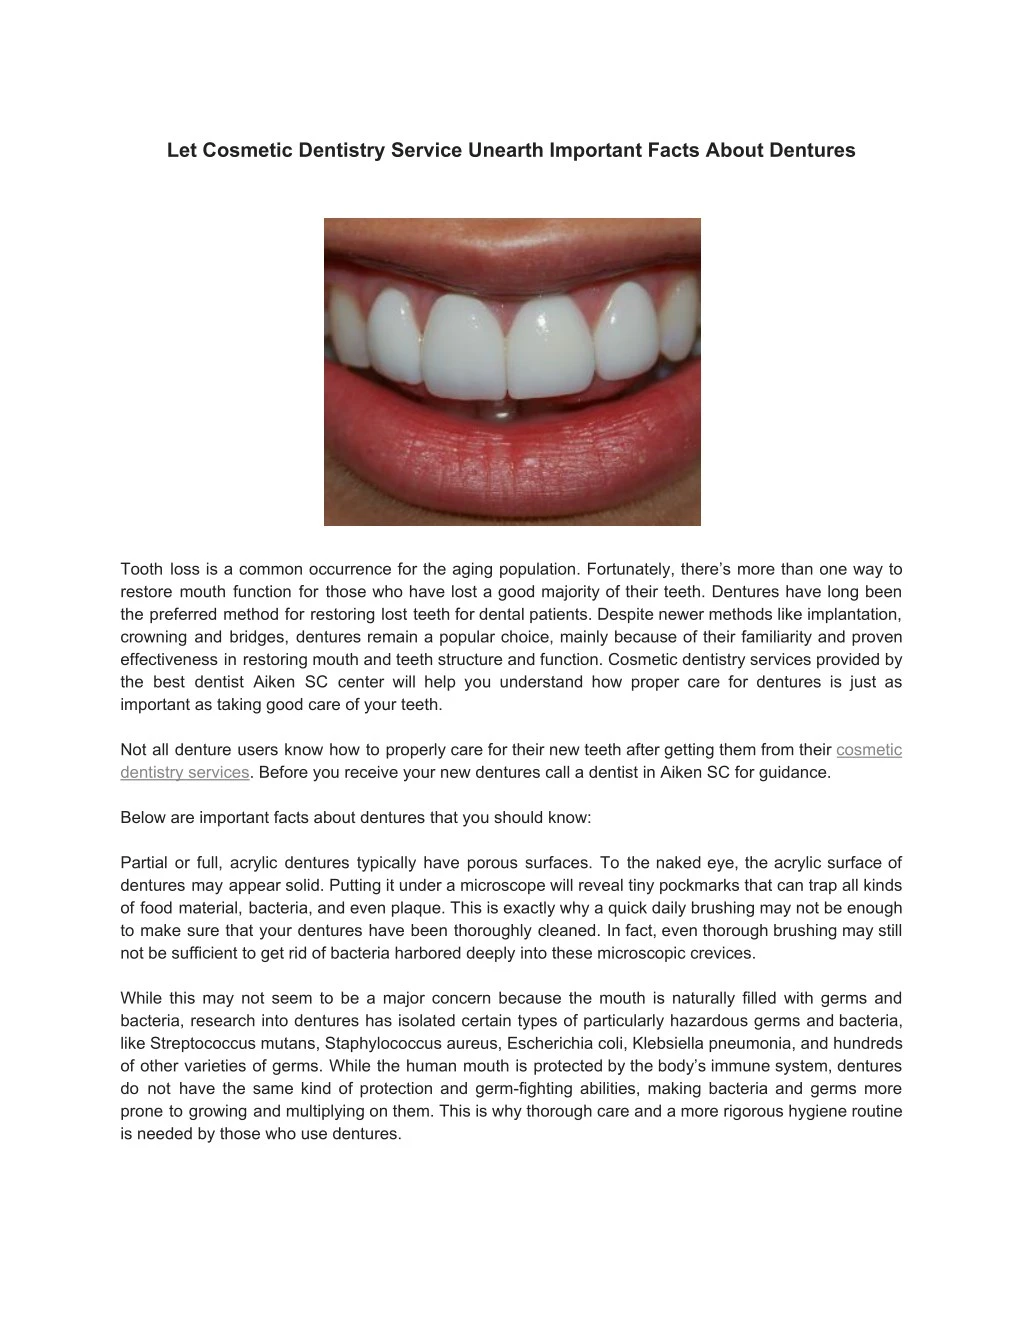 let cosmetic dentistry service unearth important